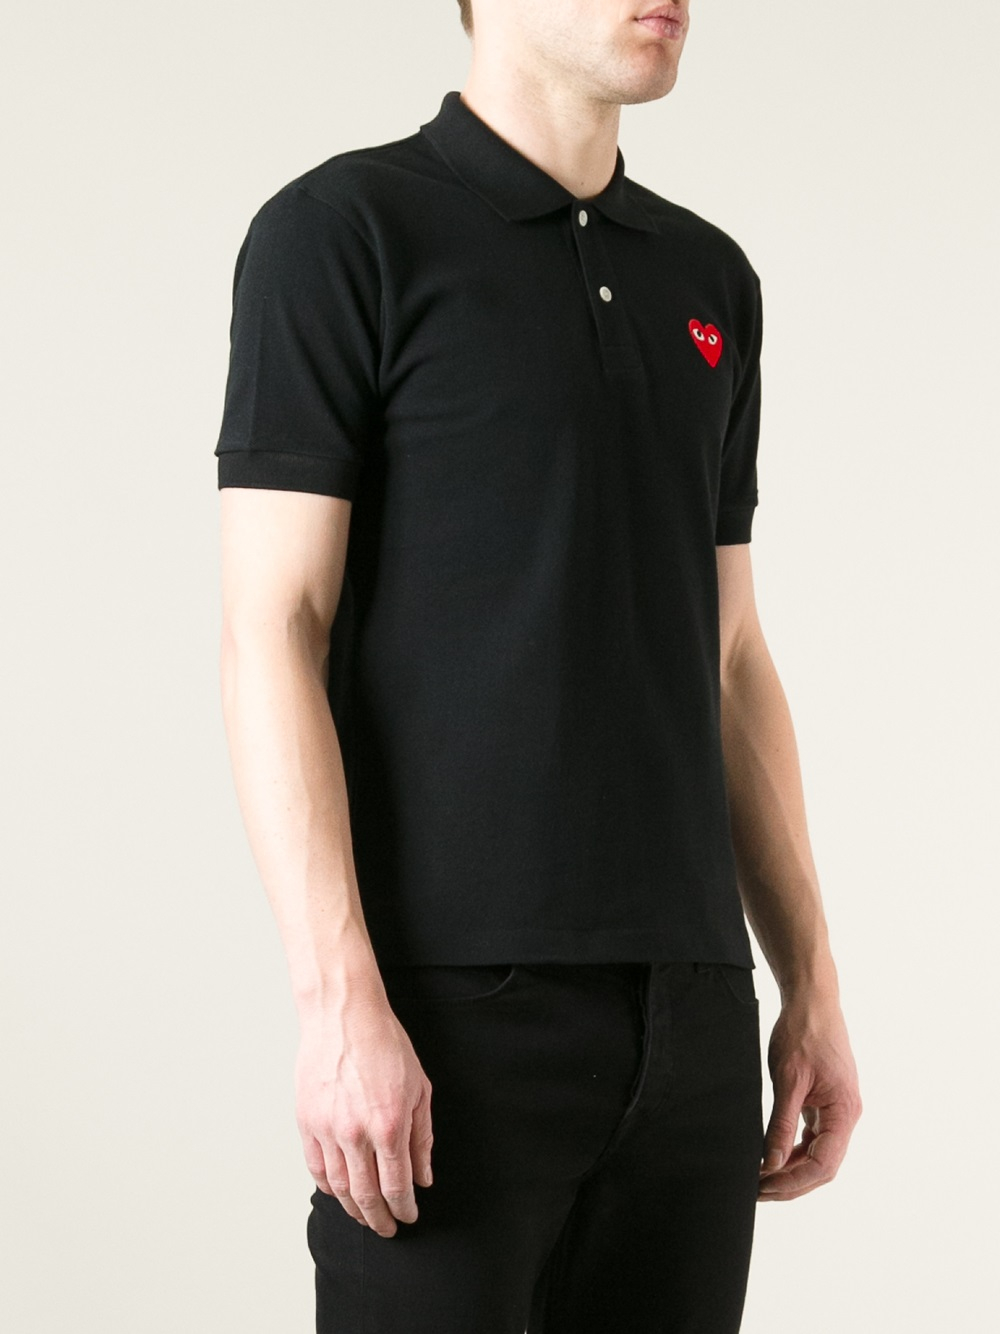 Play comme des garçons Embroidered Heart Polo Shirt in Black for Men | Lyst